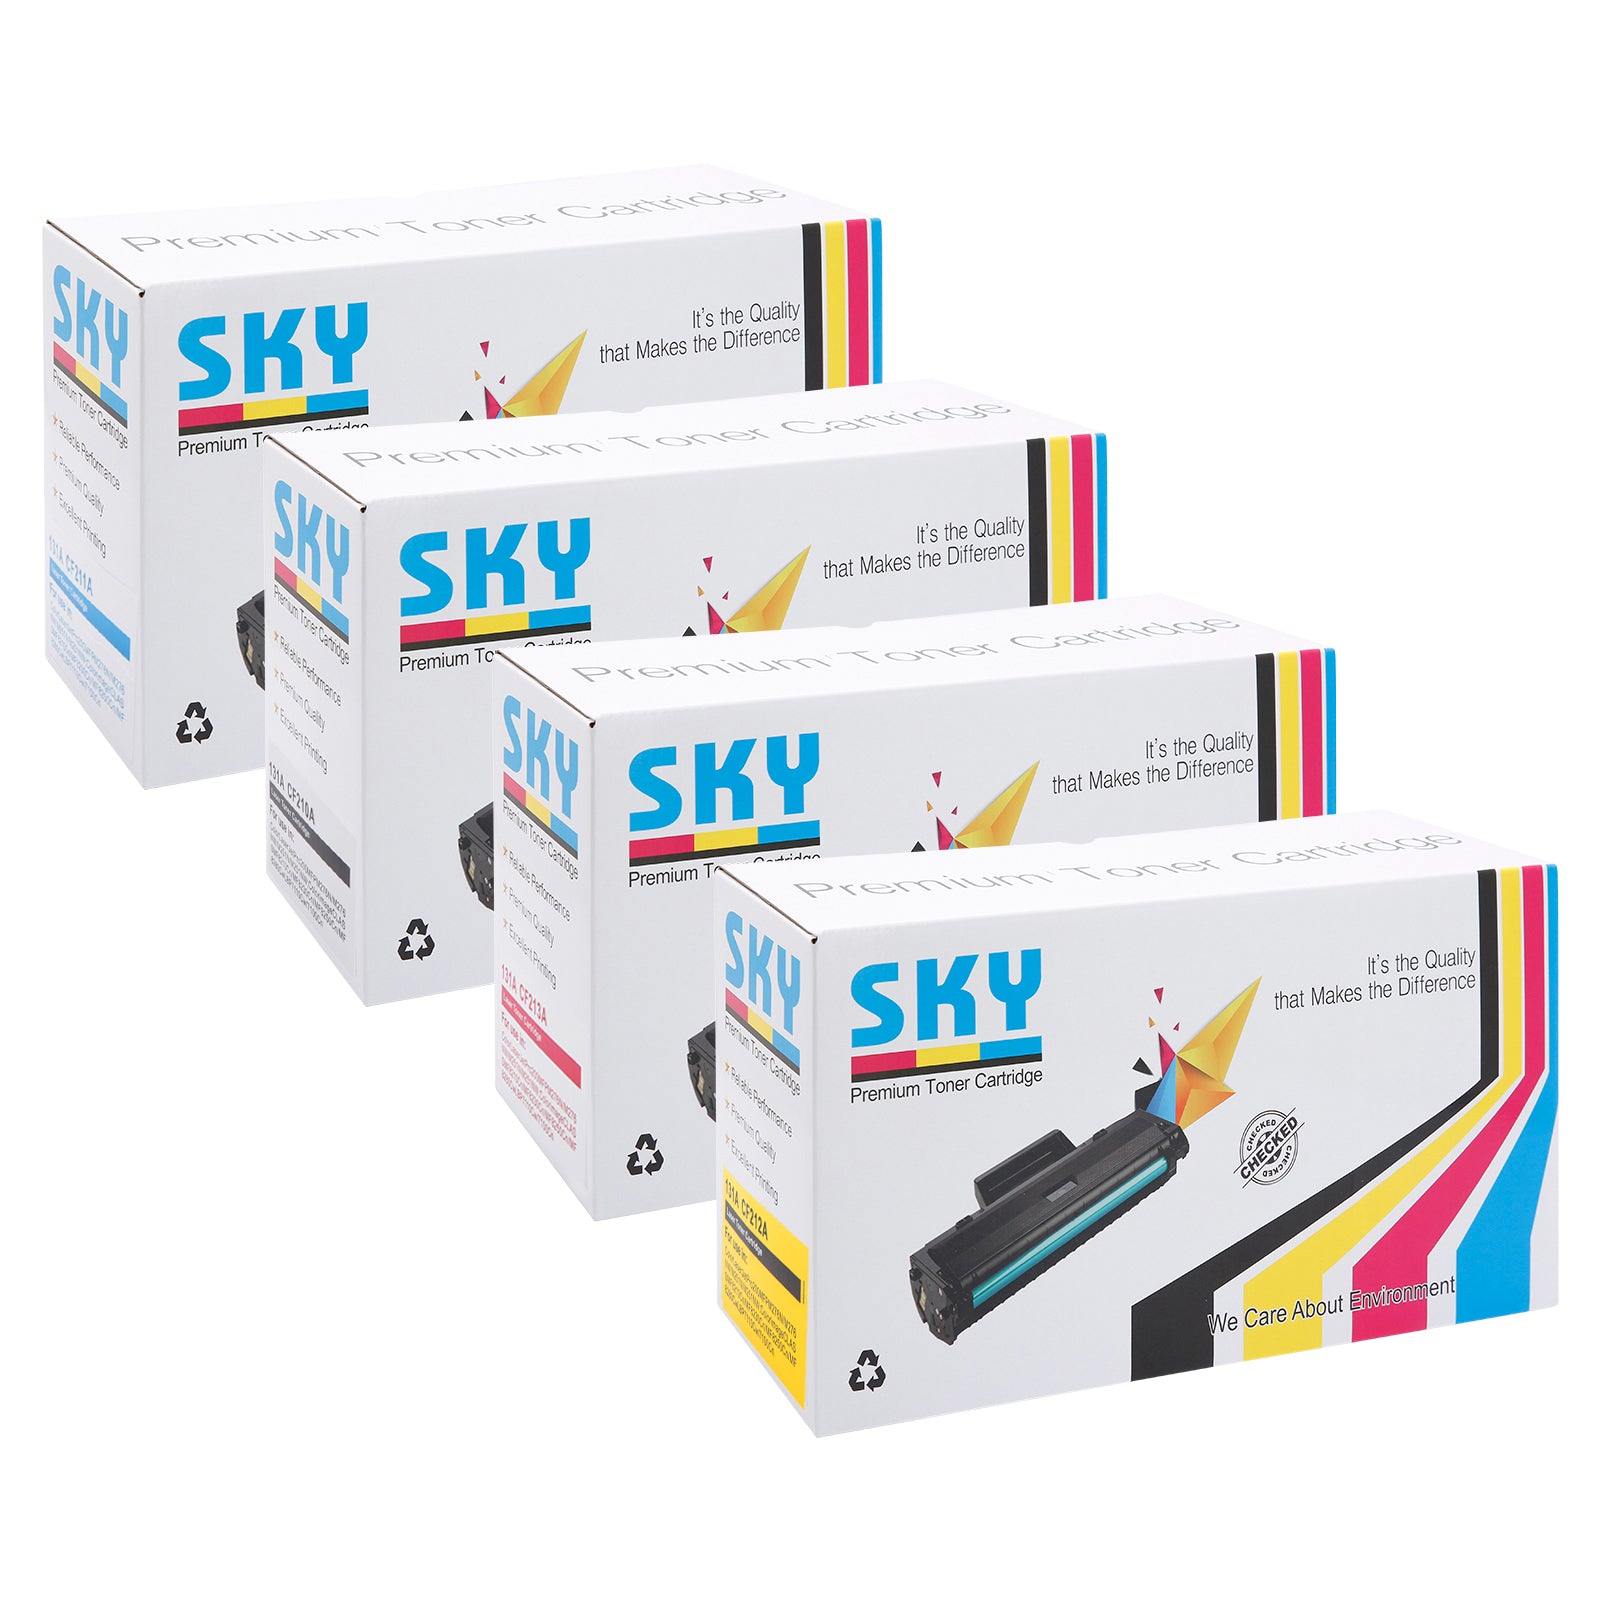 SKY 731 Compatible Toner Cartridges for imageCLASS MF8280Cw and MF628CW Printer